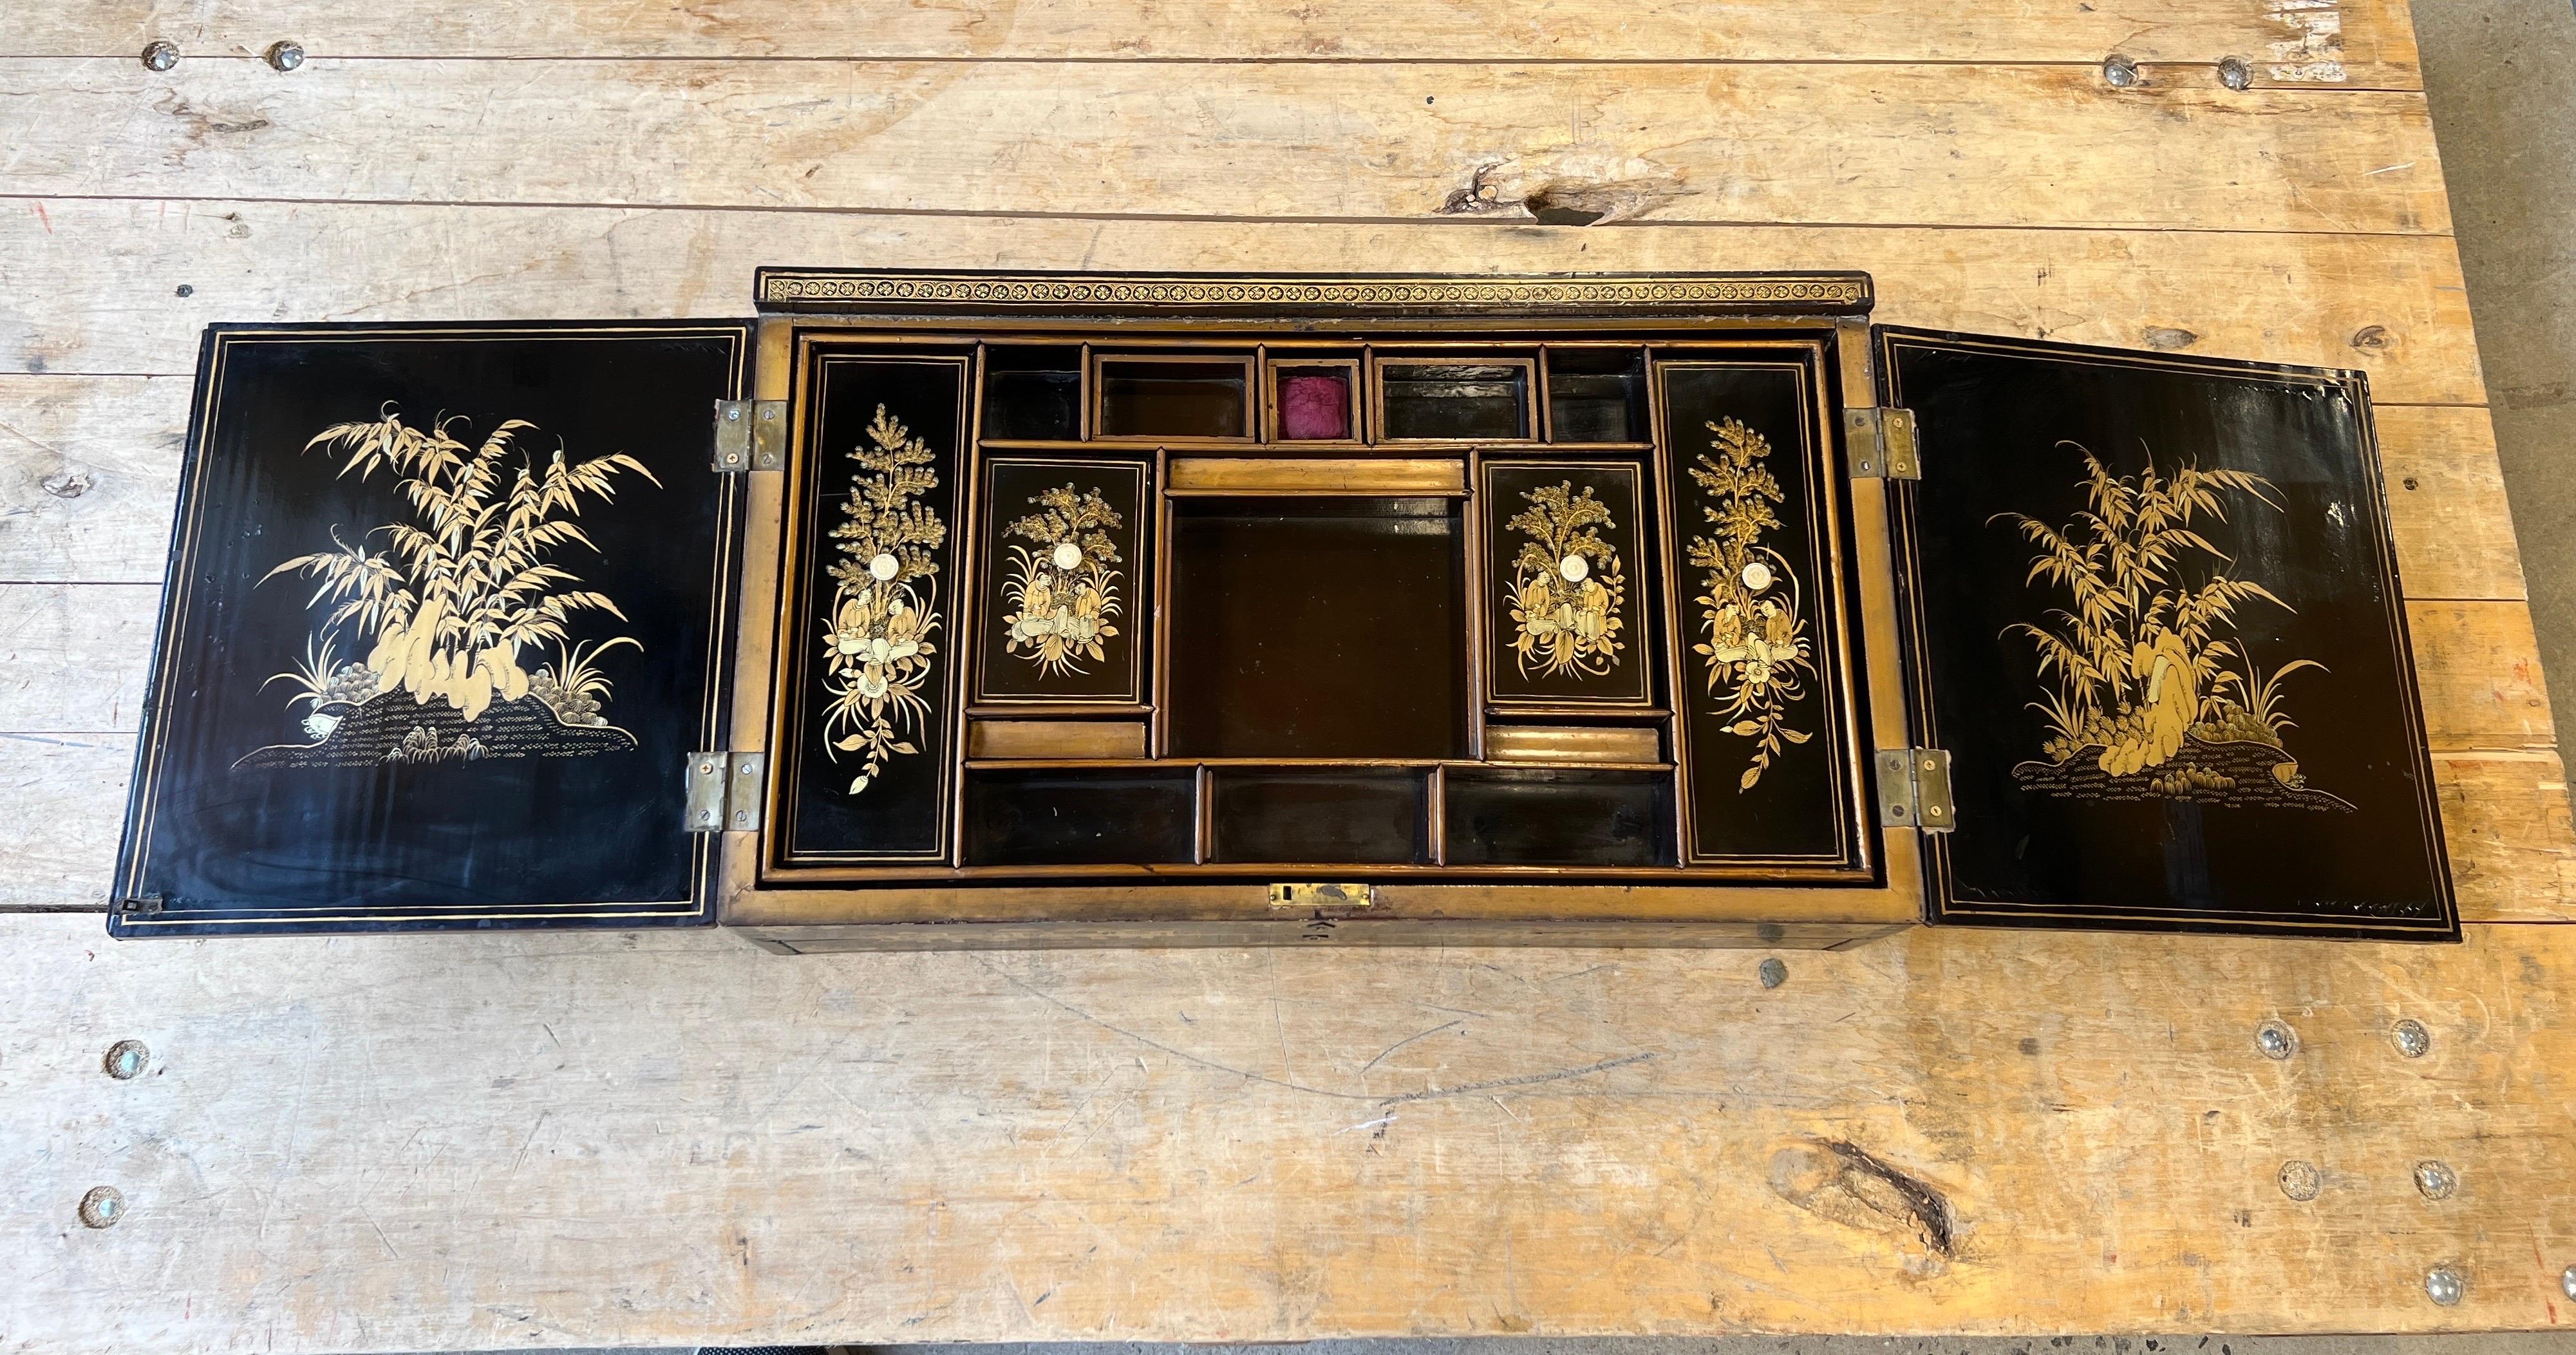 Chinese export, circa 1820.
An exceptional quality and rare form. Featuring figural landscape decorations in gilt to the main black lacquer doors, which open to reveal 13 separated compartment boxes on one removable tray with an open area